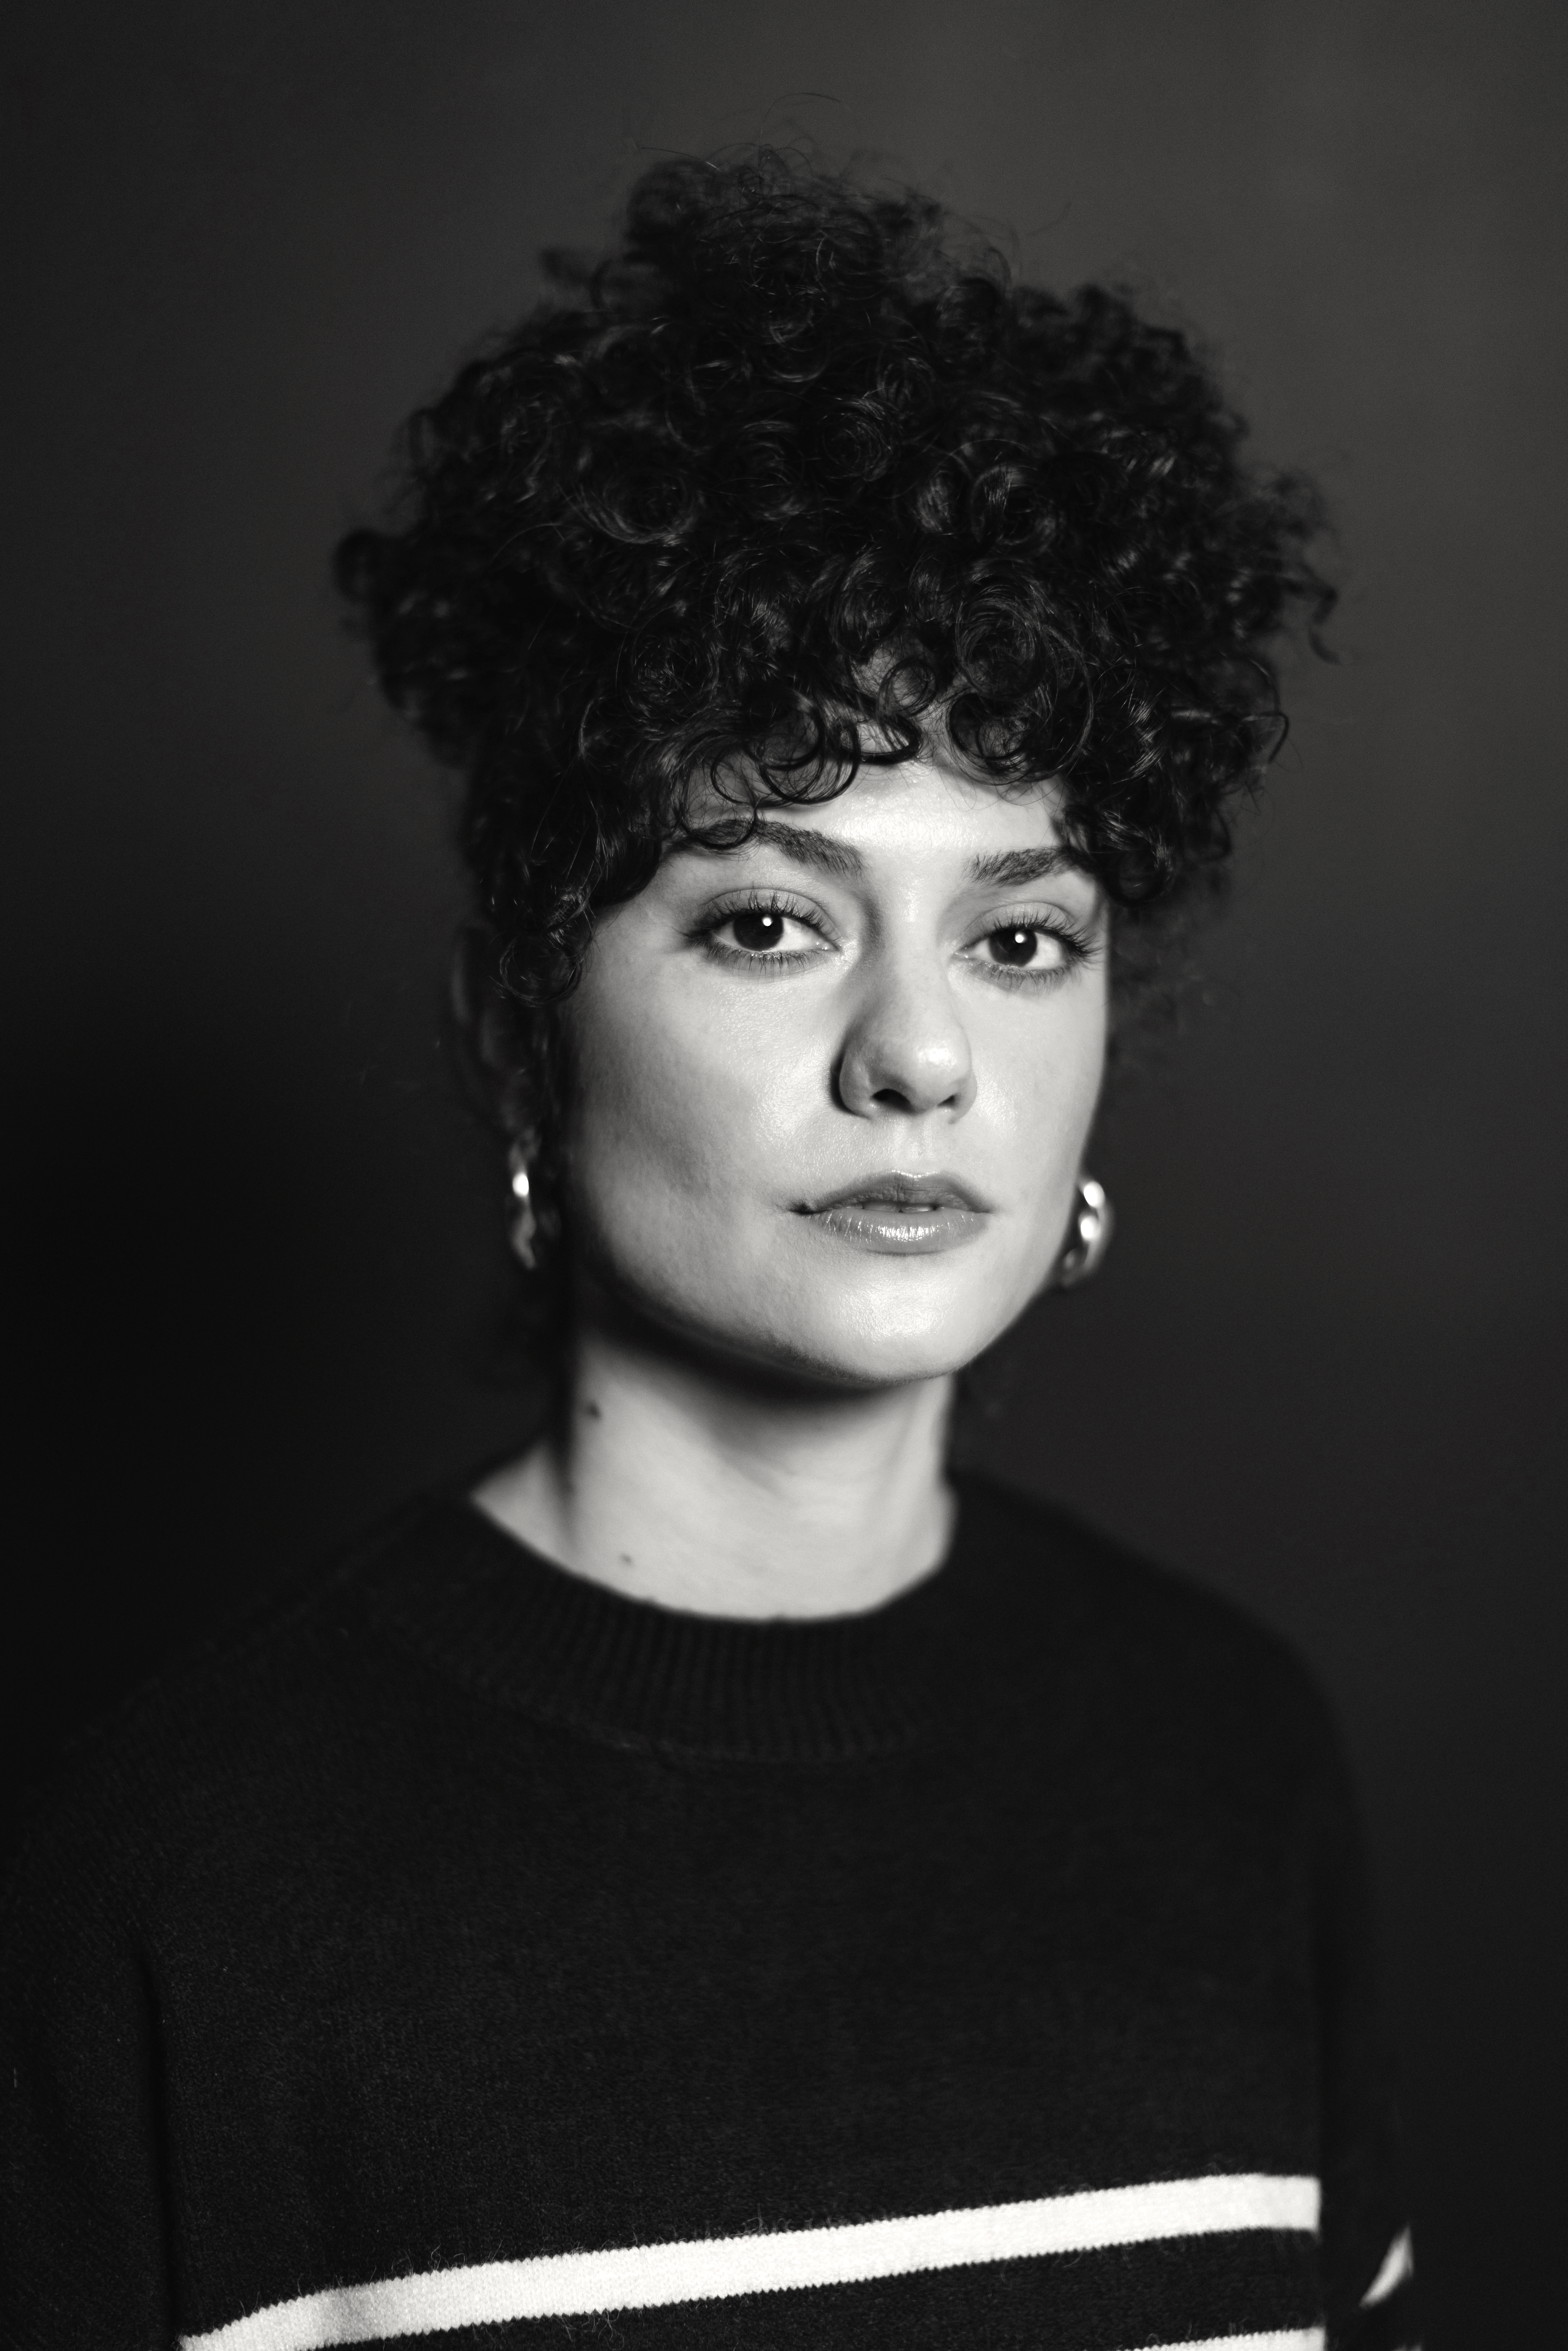 A black and white portrait of a person with light skin and curly dark hair in an updo.